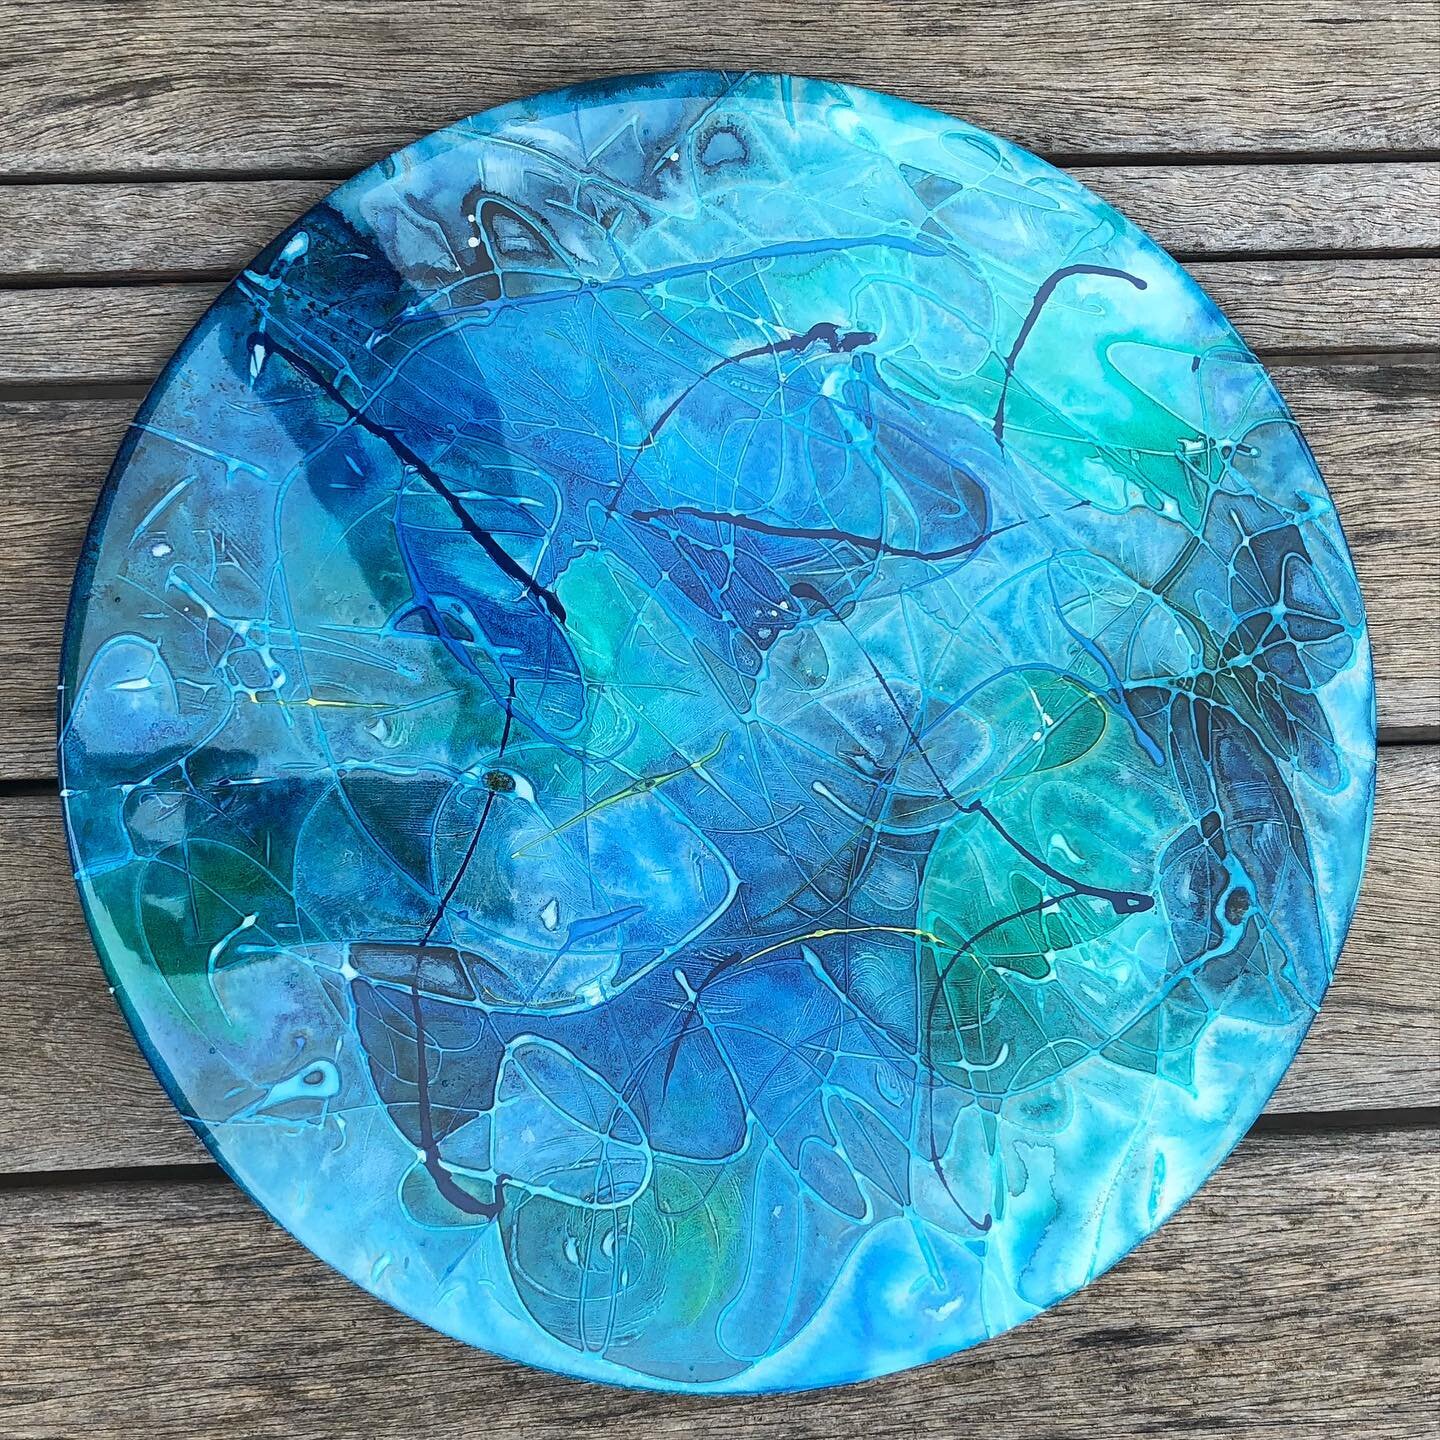 &ldquo;OCEAN DREAMS&rdquo;

Cleansing
Enliven 
Healing 

Acrylic/ Ink/ Resin
MDF board. 
30cm 

Deep dive into this SoulFlake!!! 

DM me for more info. 

www.soulflakes.com.au 

#soulflakes #soulflakesstudio #loveblue #loveocean 
#oceanlover #healing